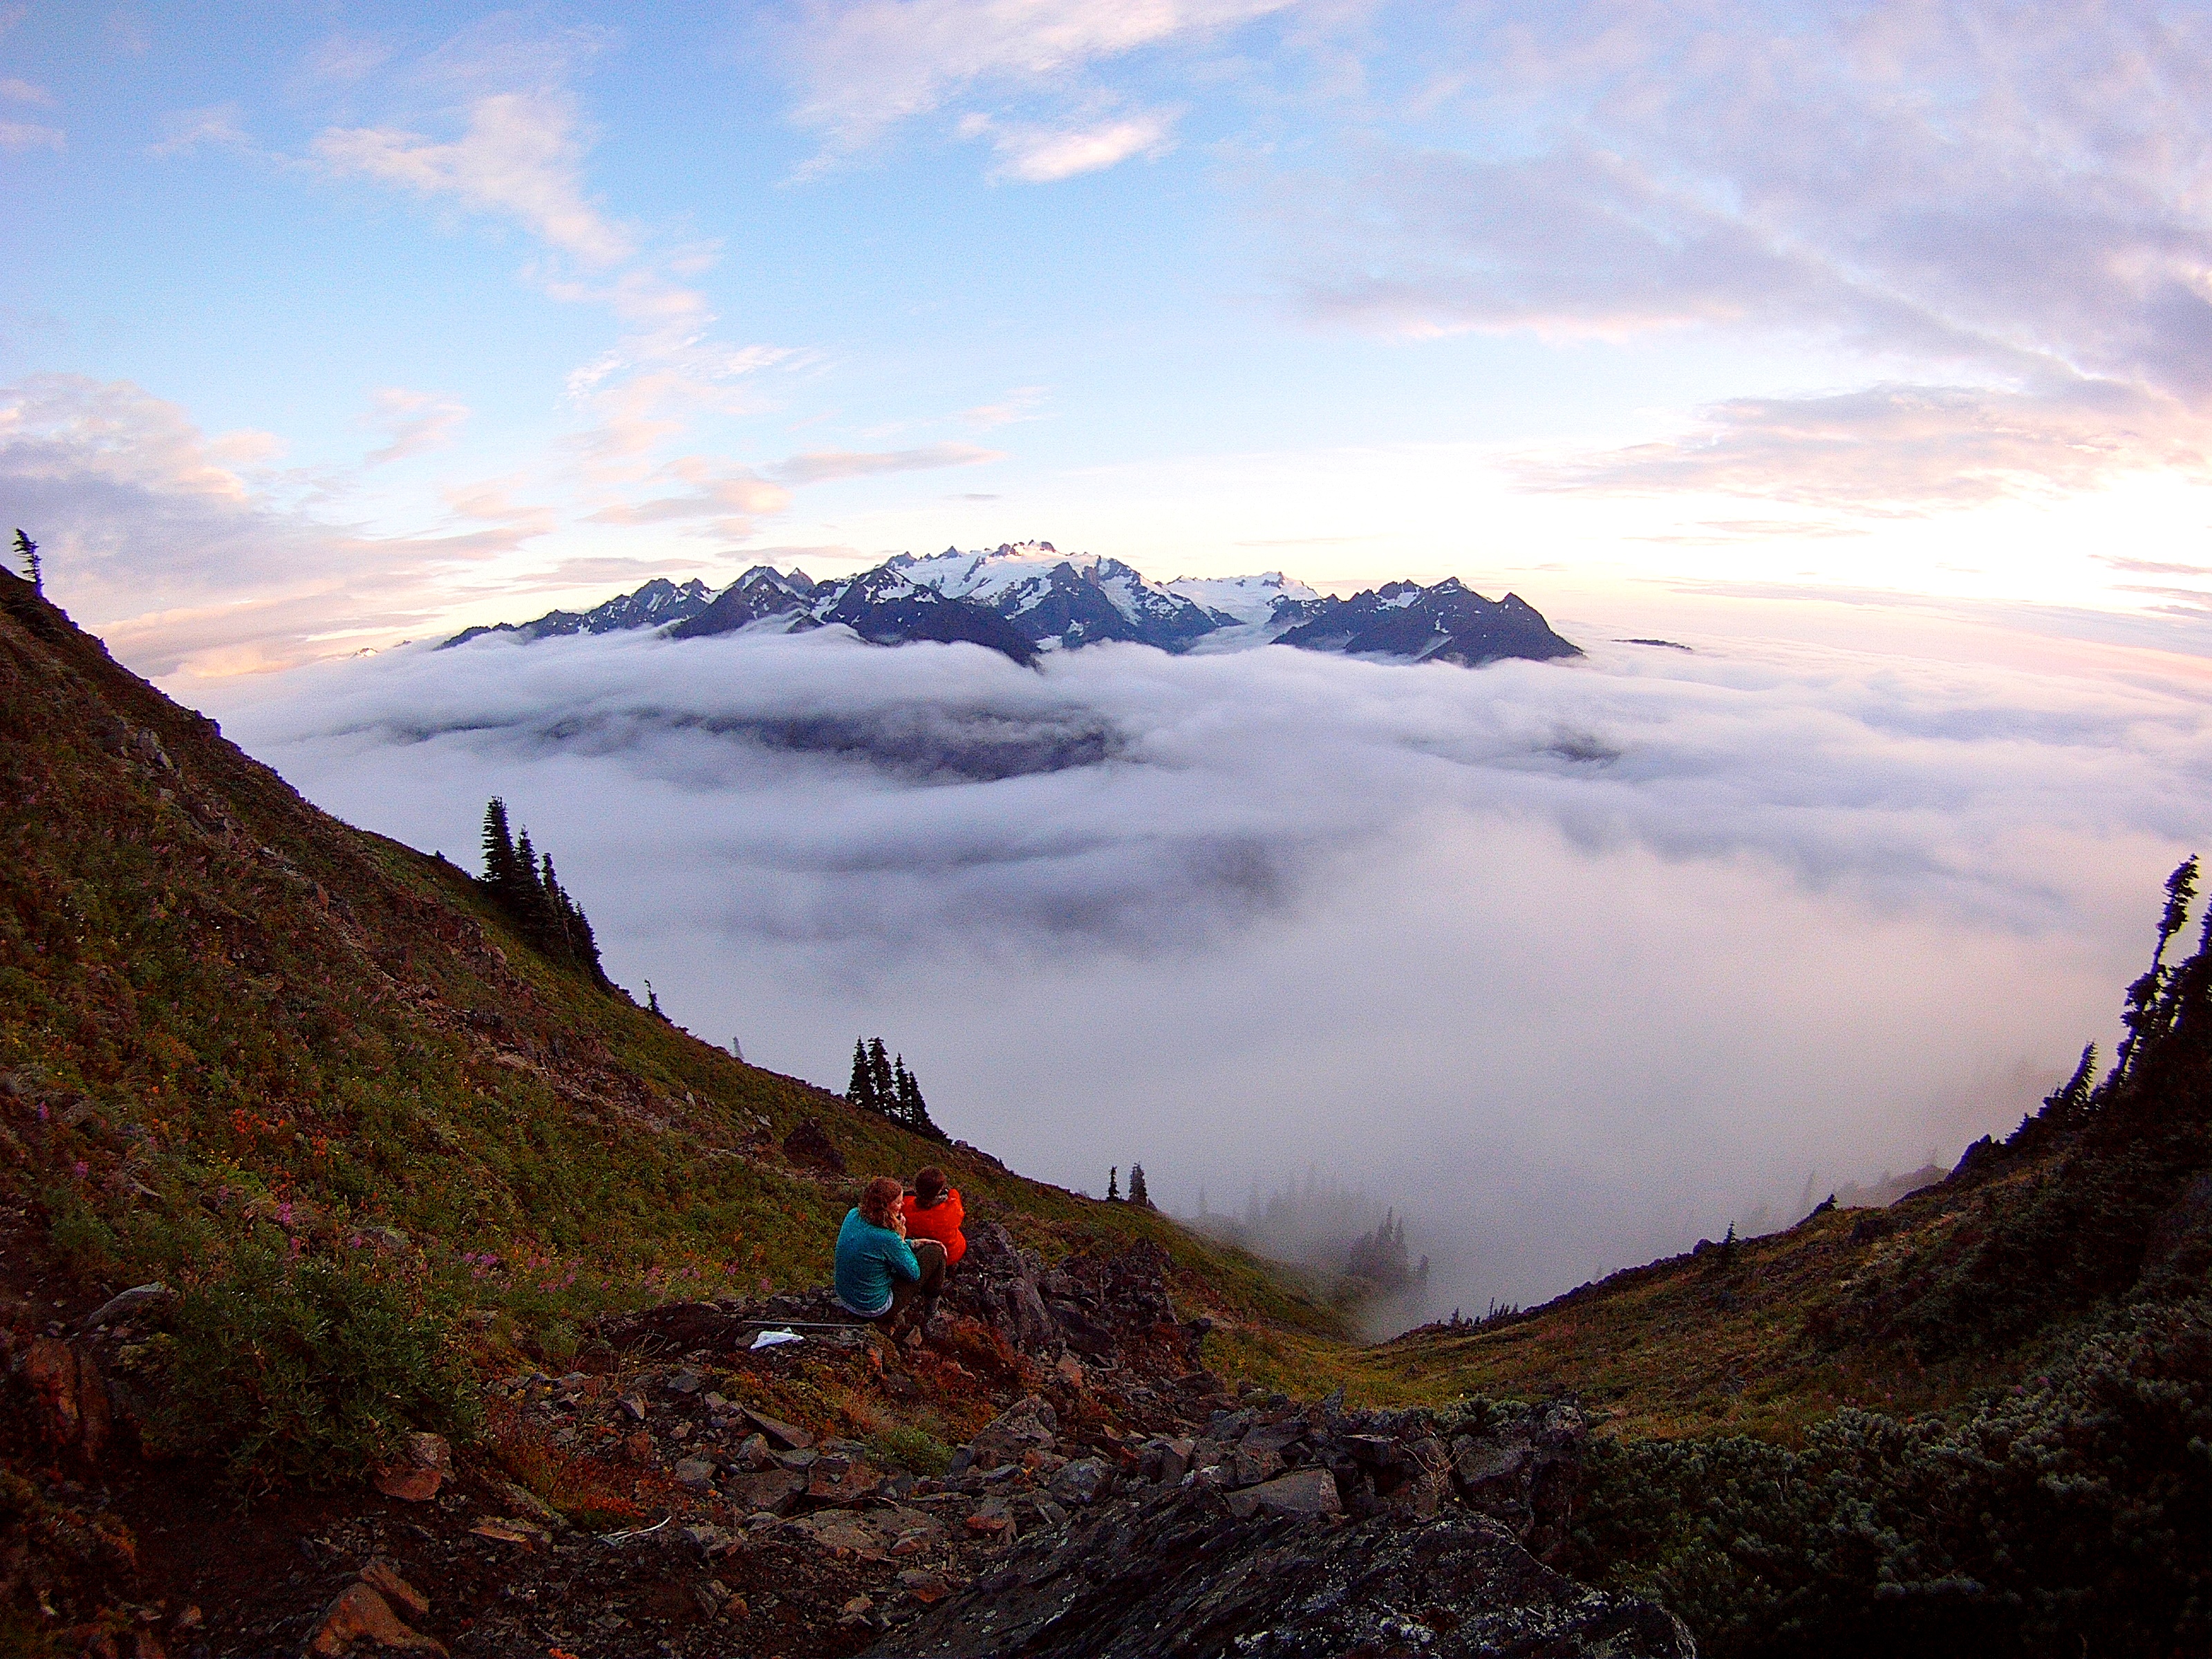 Hikers sit and watch the sun set behind snow-capped mountains.